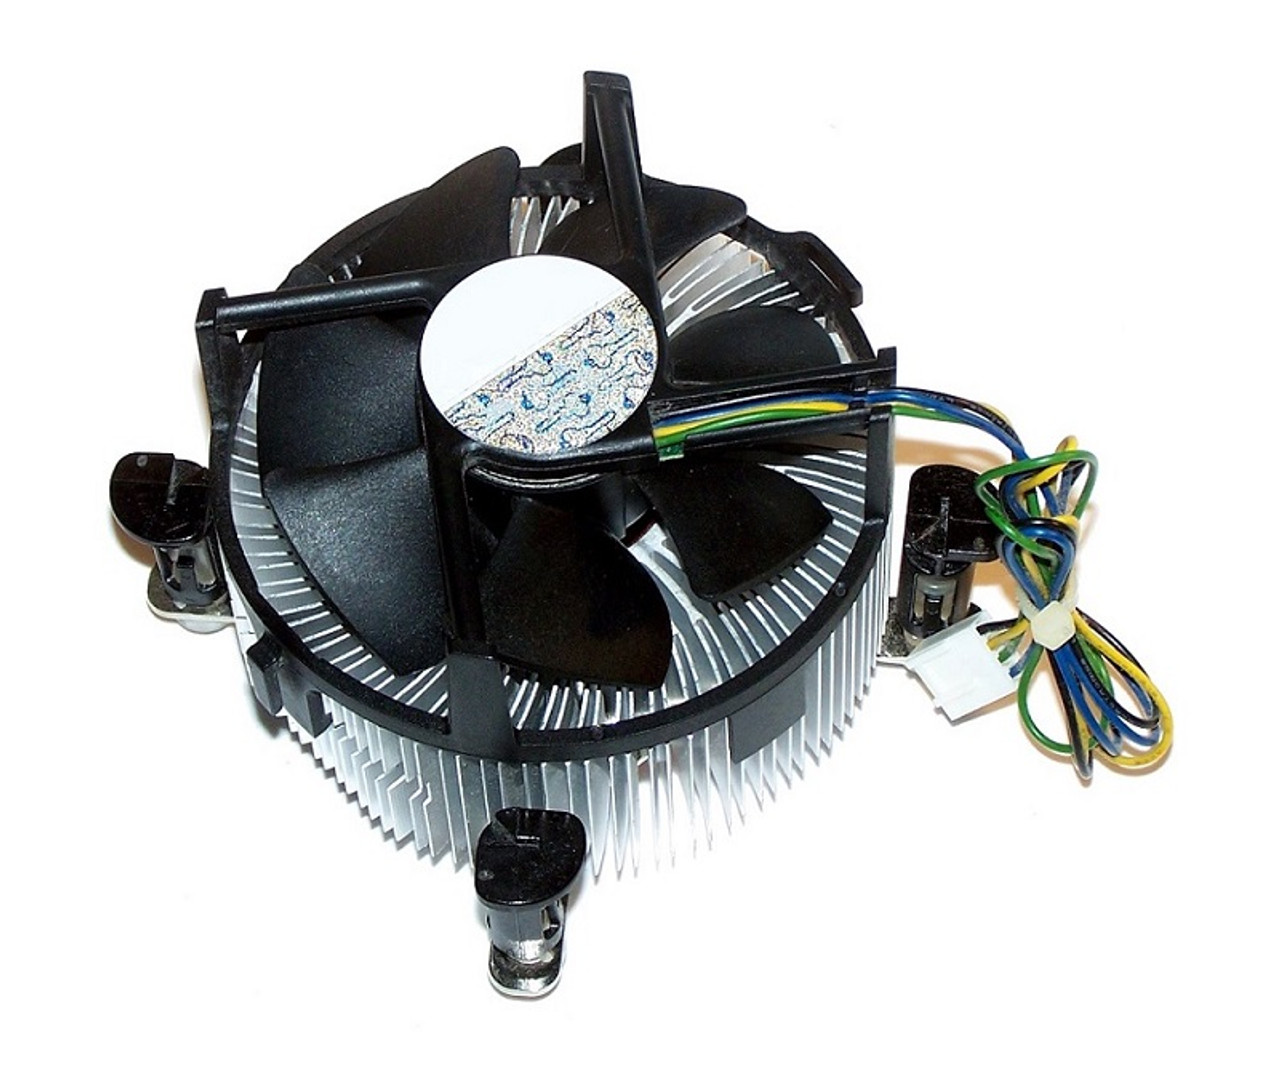 HC437 - Dell Cooling Fan for Dell Inspiron 630m/Inspiron 640m